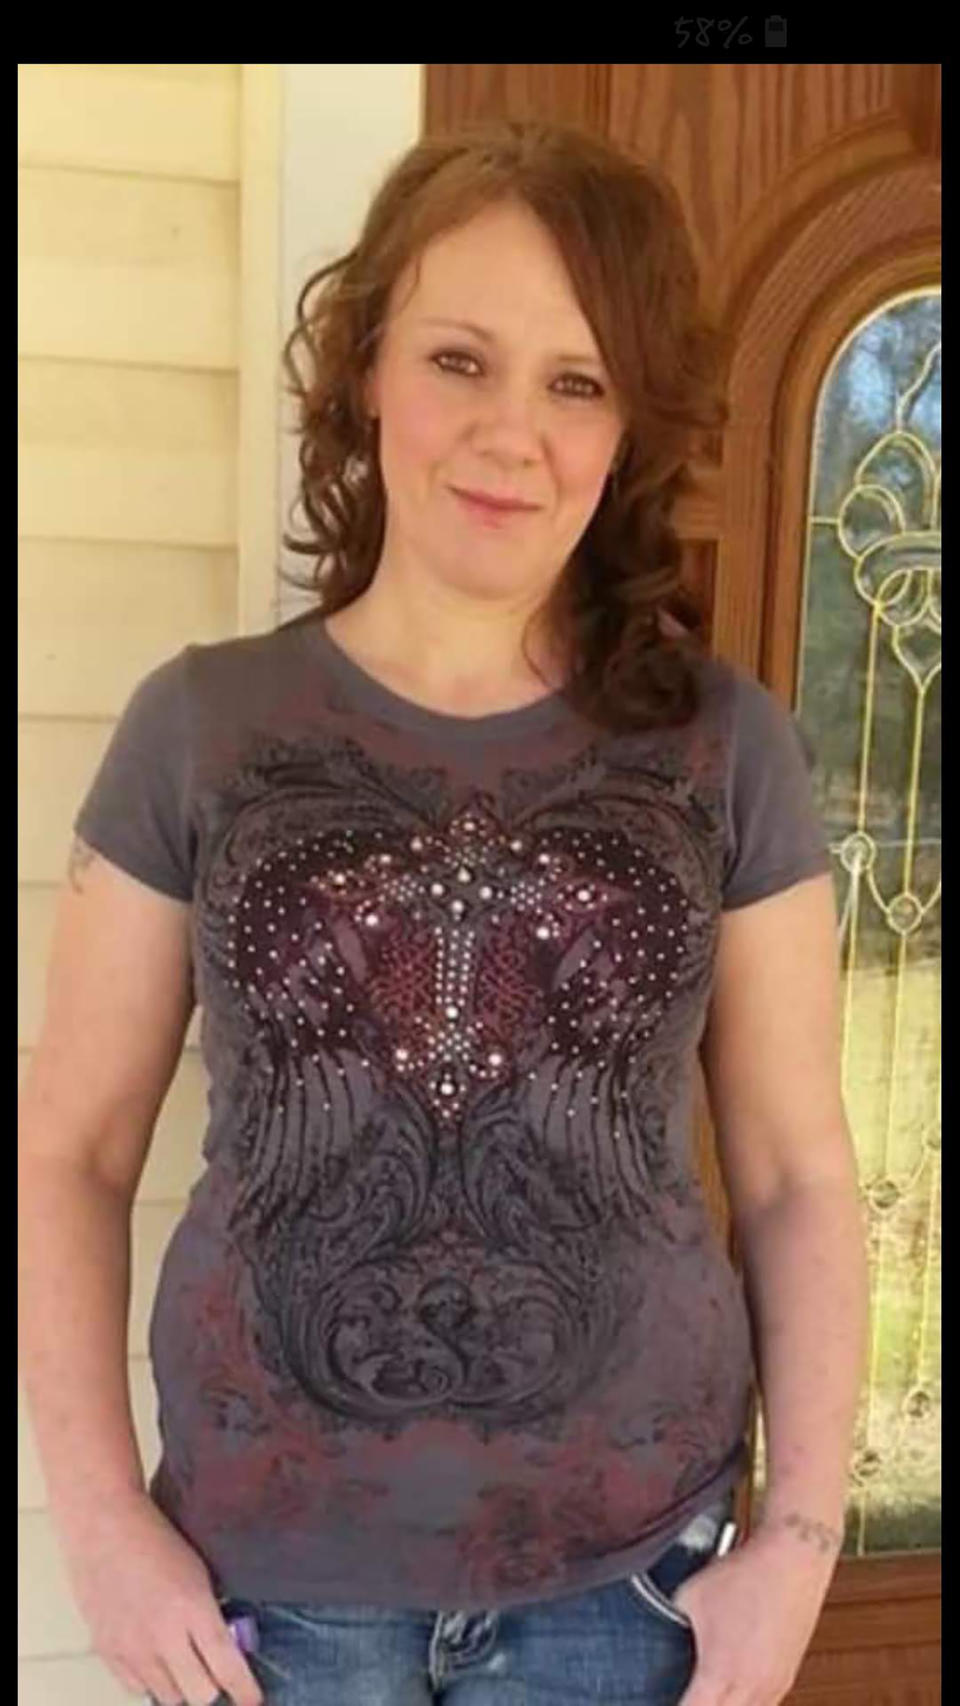 This undated photo provided by Mike Austin shows his wife Holly Barlow-Austin in Texarkana, Texas, before her 2019 death after being held in a Texarkana jail. Her family brought a federal lawsuit Wednesday, Sept, 16, 2020, against LaSalle Corrections, claiming its staff neglected Barlow-Austin's care and ignored her pleas for help as her health deteriorated and she went blind. (Courtesy Mike Austin via AP)